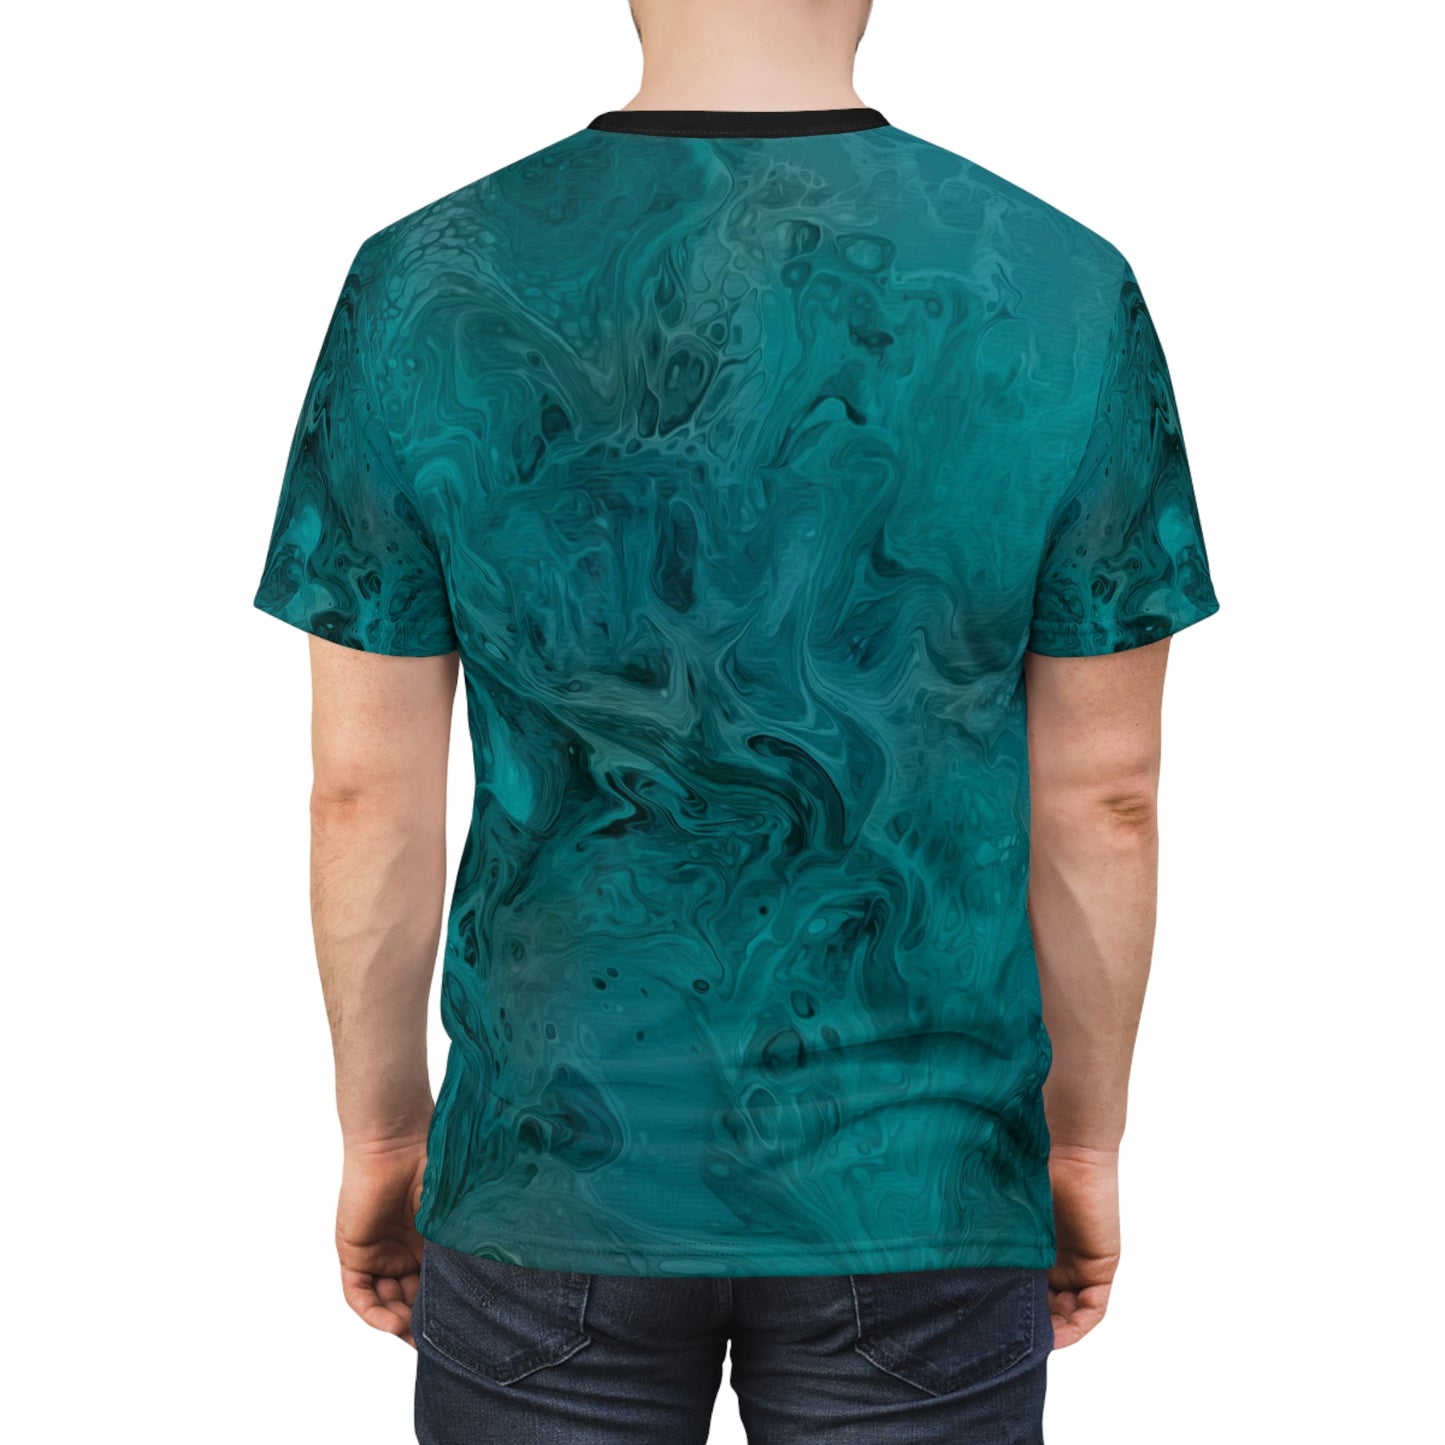 Unisex Soft Tee - Life's Mystery - Forest